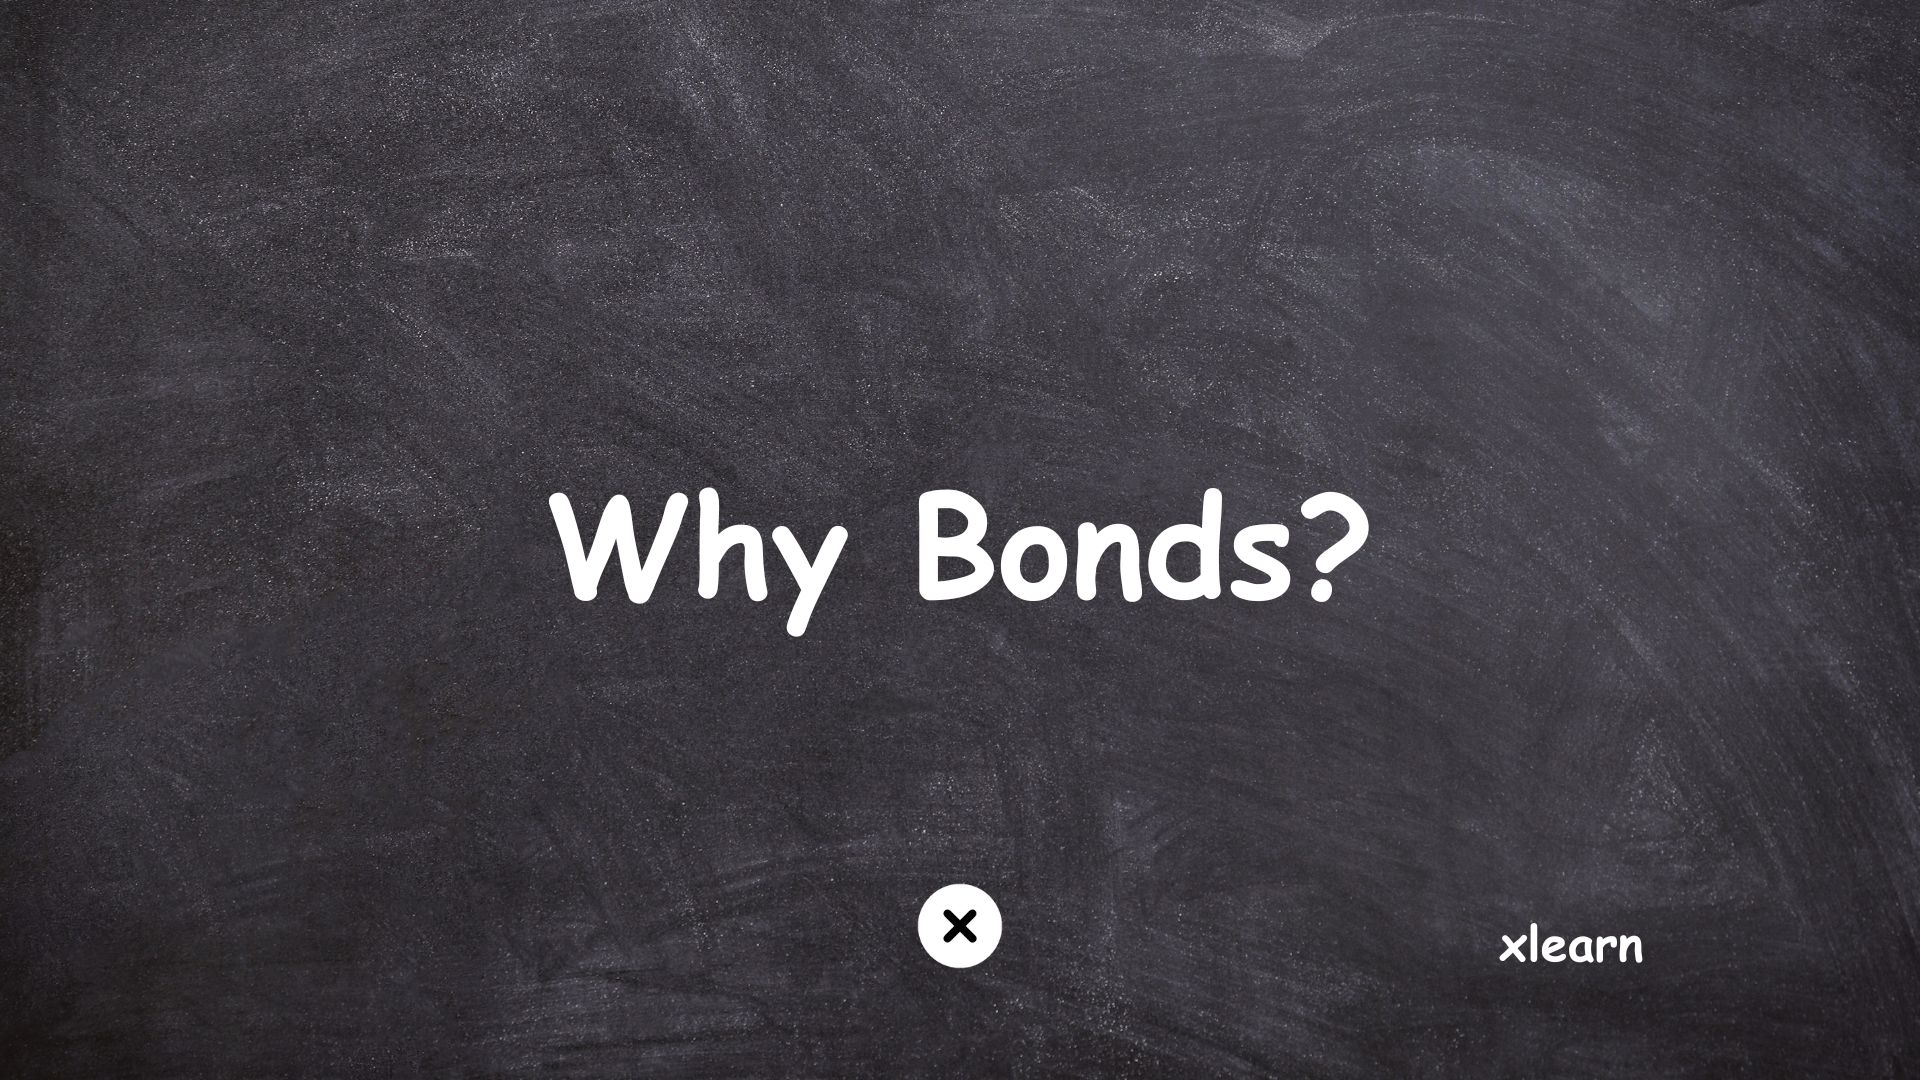 Why invest in bonds?